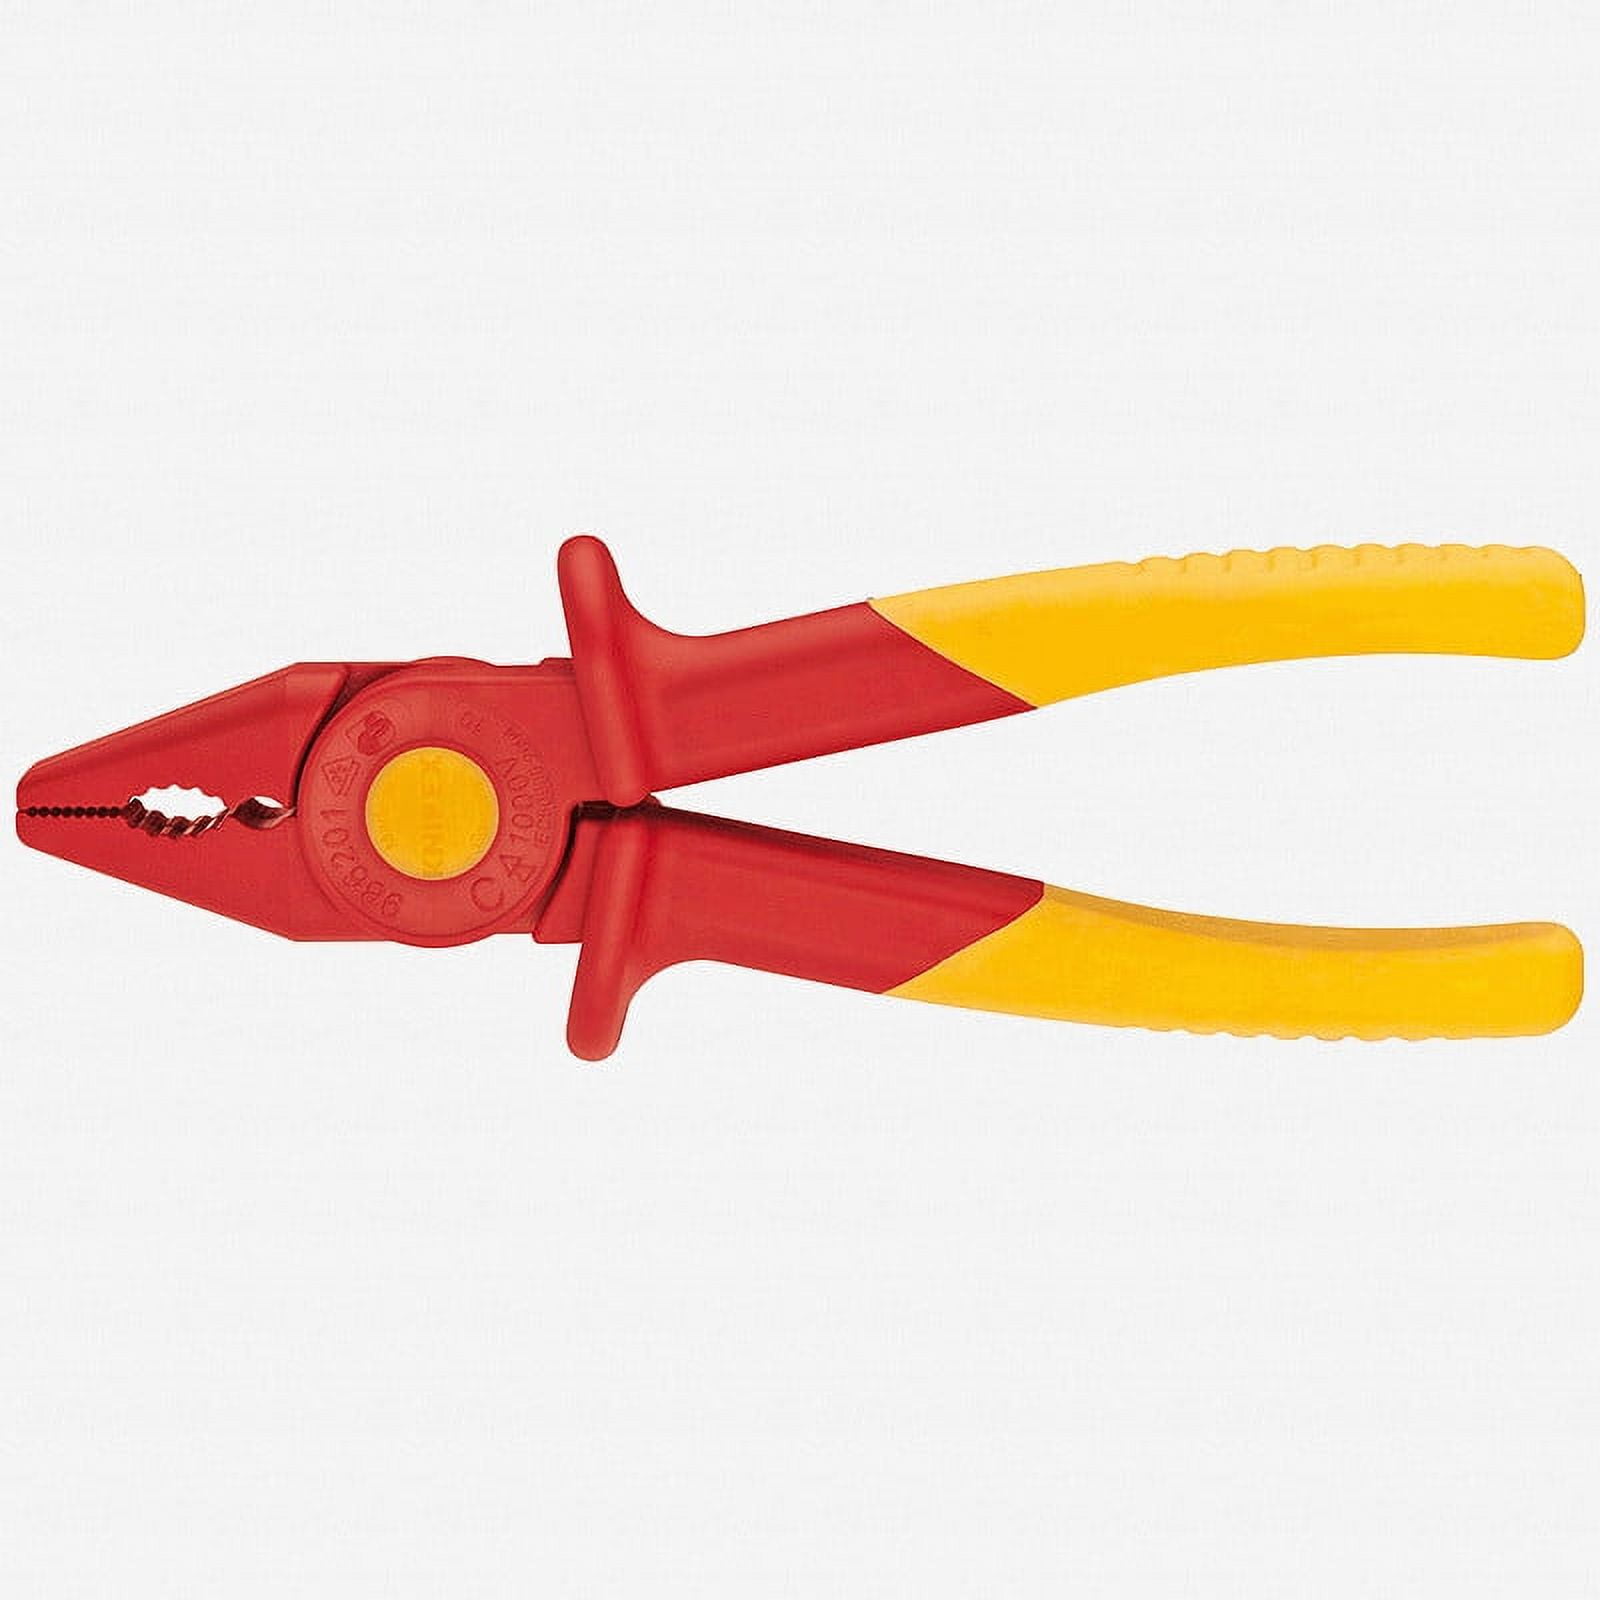 Klein Tools-D301-6C-Standard Long-Nose Pliers, Spring-Loaded, 6